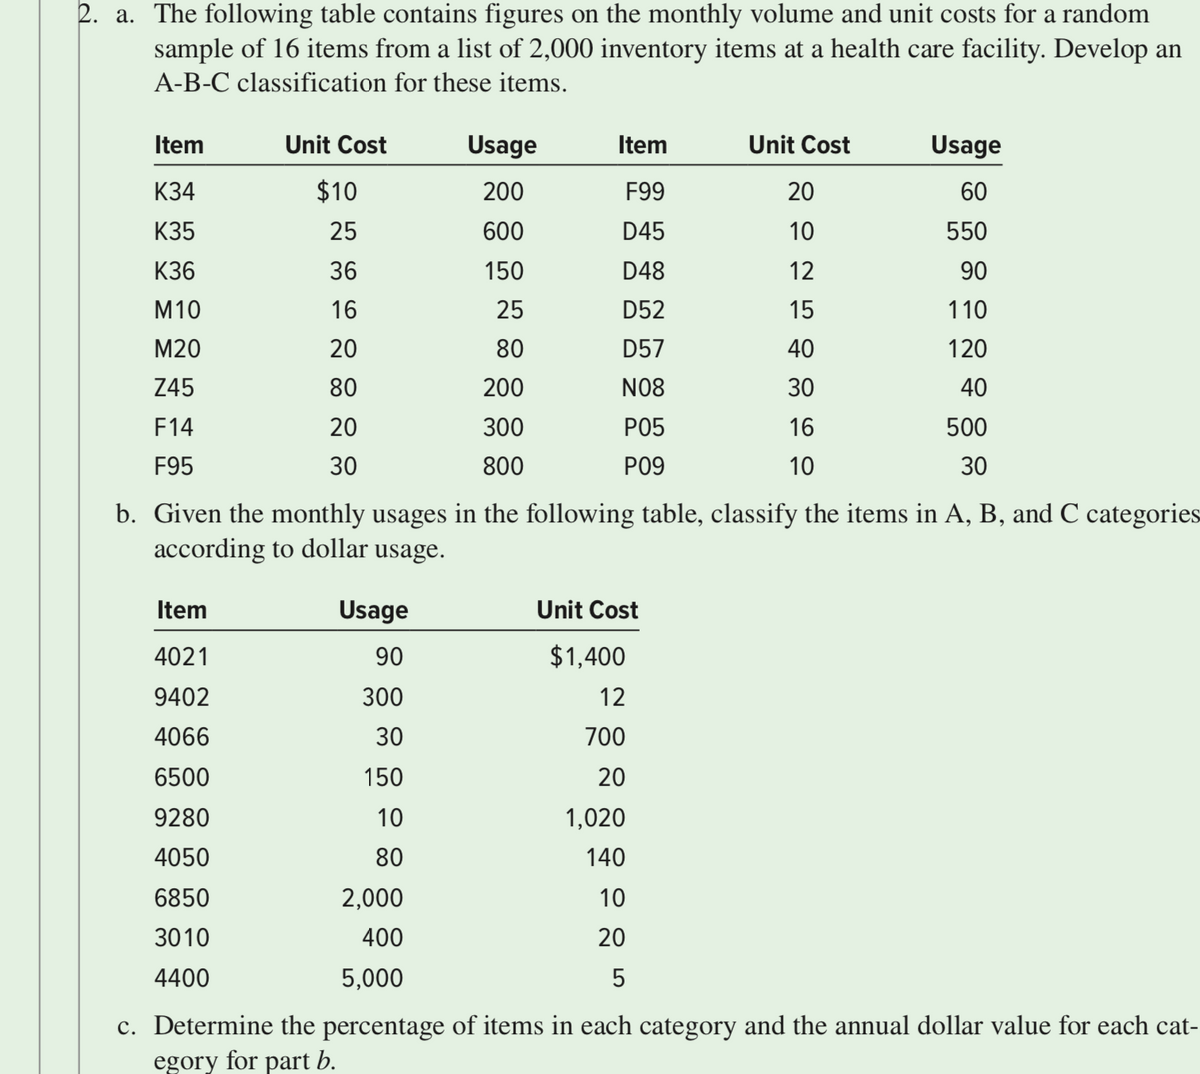 2. a. The following table contains figures on the monthly volume and unit costs for a random
sample of 16 items from a list of 2,000 inventory items at a health care facility. Develop an
A-B-C classification for these items.
Item
Unit Cost
Usage
Item
Unit Cost
Usage
К34
$10
200
F99
20
60
К35
25
600
D45
10
550
K36
36
150
D48
12
90
M10
16
25
D52
15
110
M20
20
80
D57
40
120
Z45
80
200
N08
30
40
F14
20
300
P05
16
500
F95
30
800
P09
10
30
b. Given the monthly usages in the following table, classify the items in A, B, and C categories
according to dollar usage.
Item
Usage
Unit Cost
4021
90
$1,400
9402
300
12
4066
30
700
6500
150
20
9280
10
1,020
4050
80
140
6850
2,000
10
3010
400
20
4400
5,000
c. Determine the percentage of items in each category and the annual dollar value for each cat-
egory for part b.
